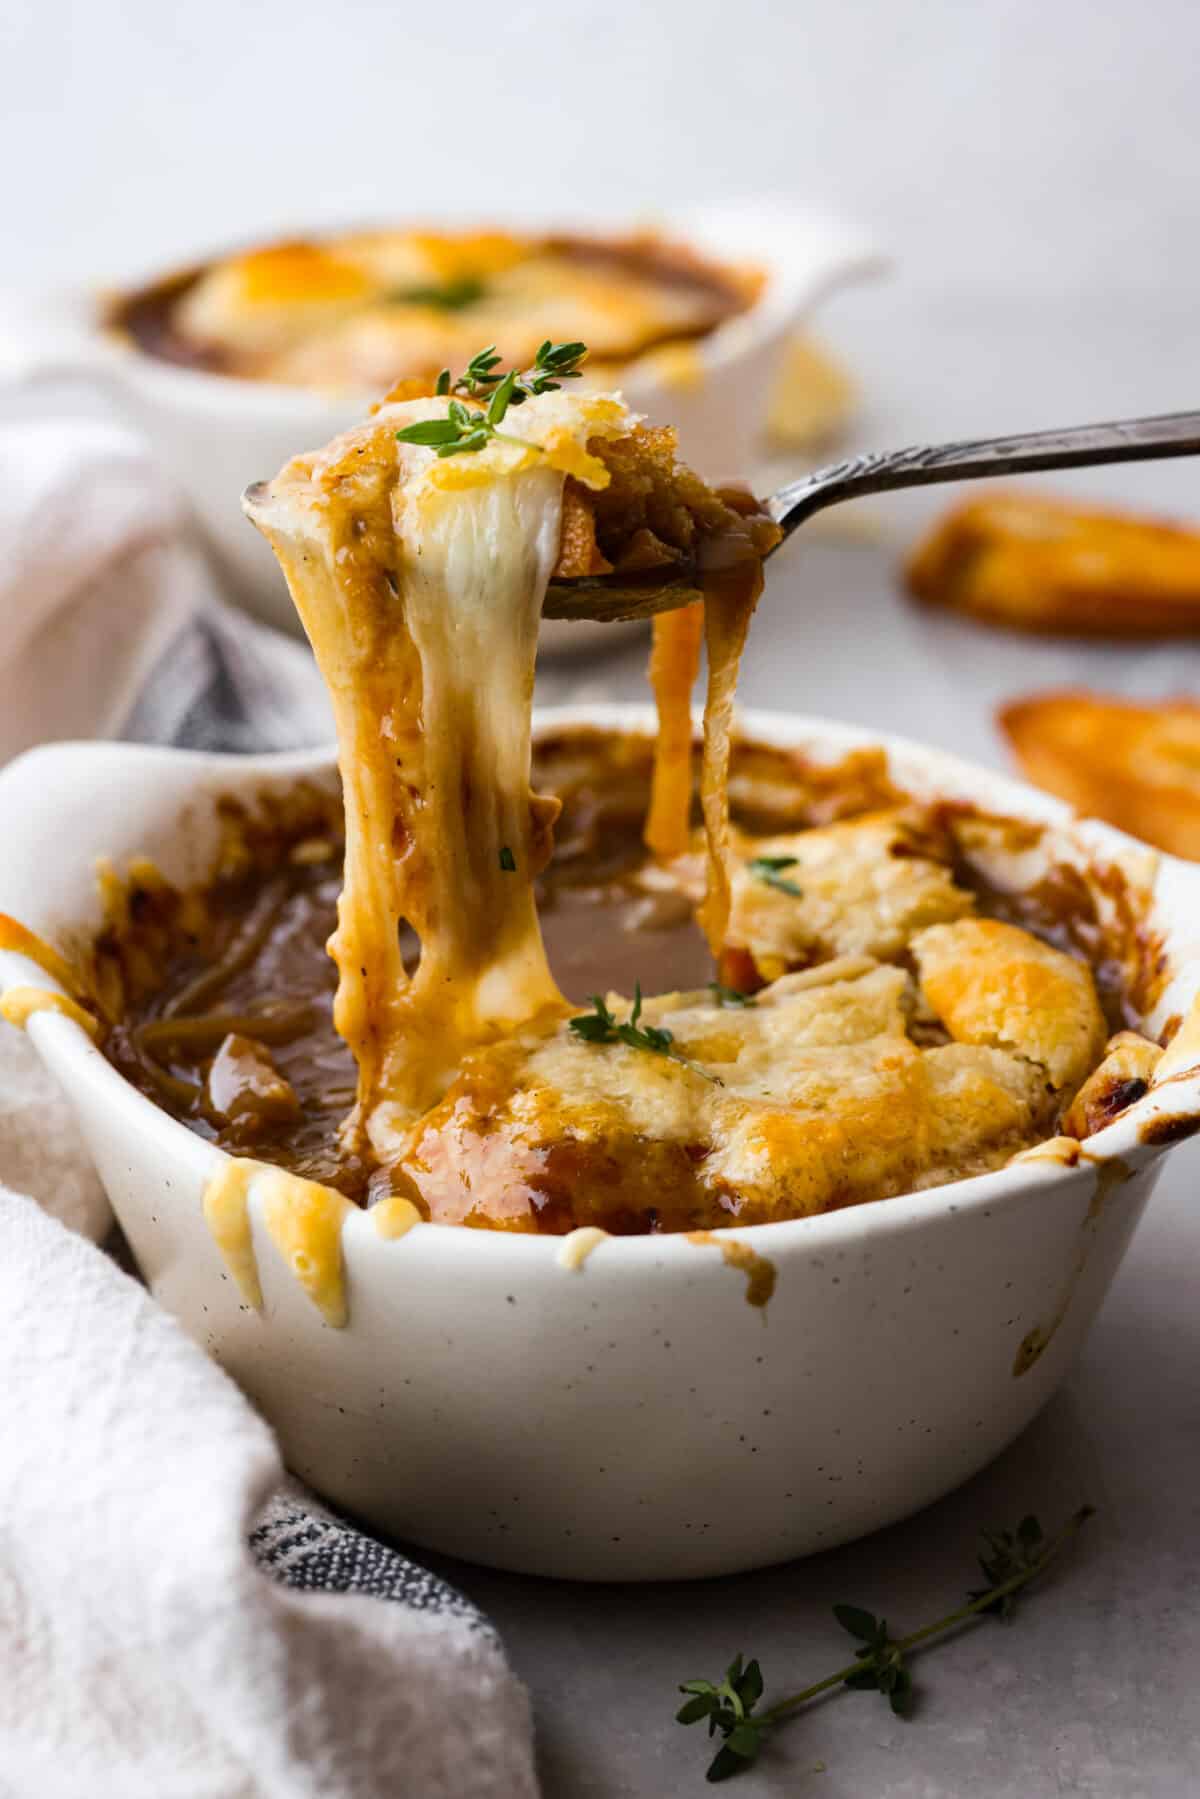 A bowl of French onion soup.